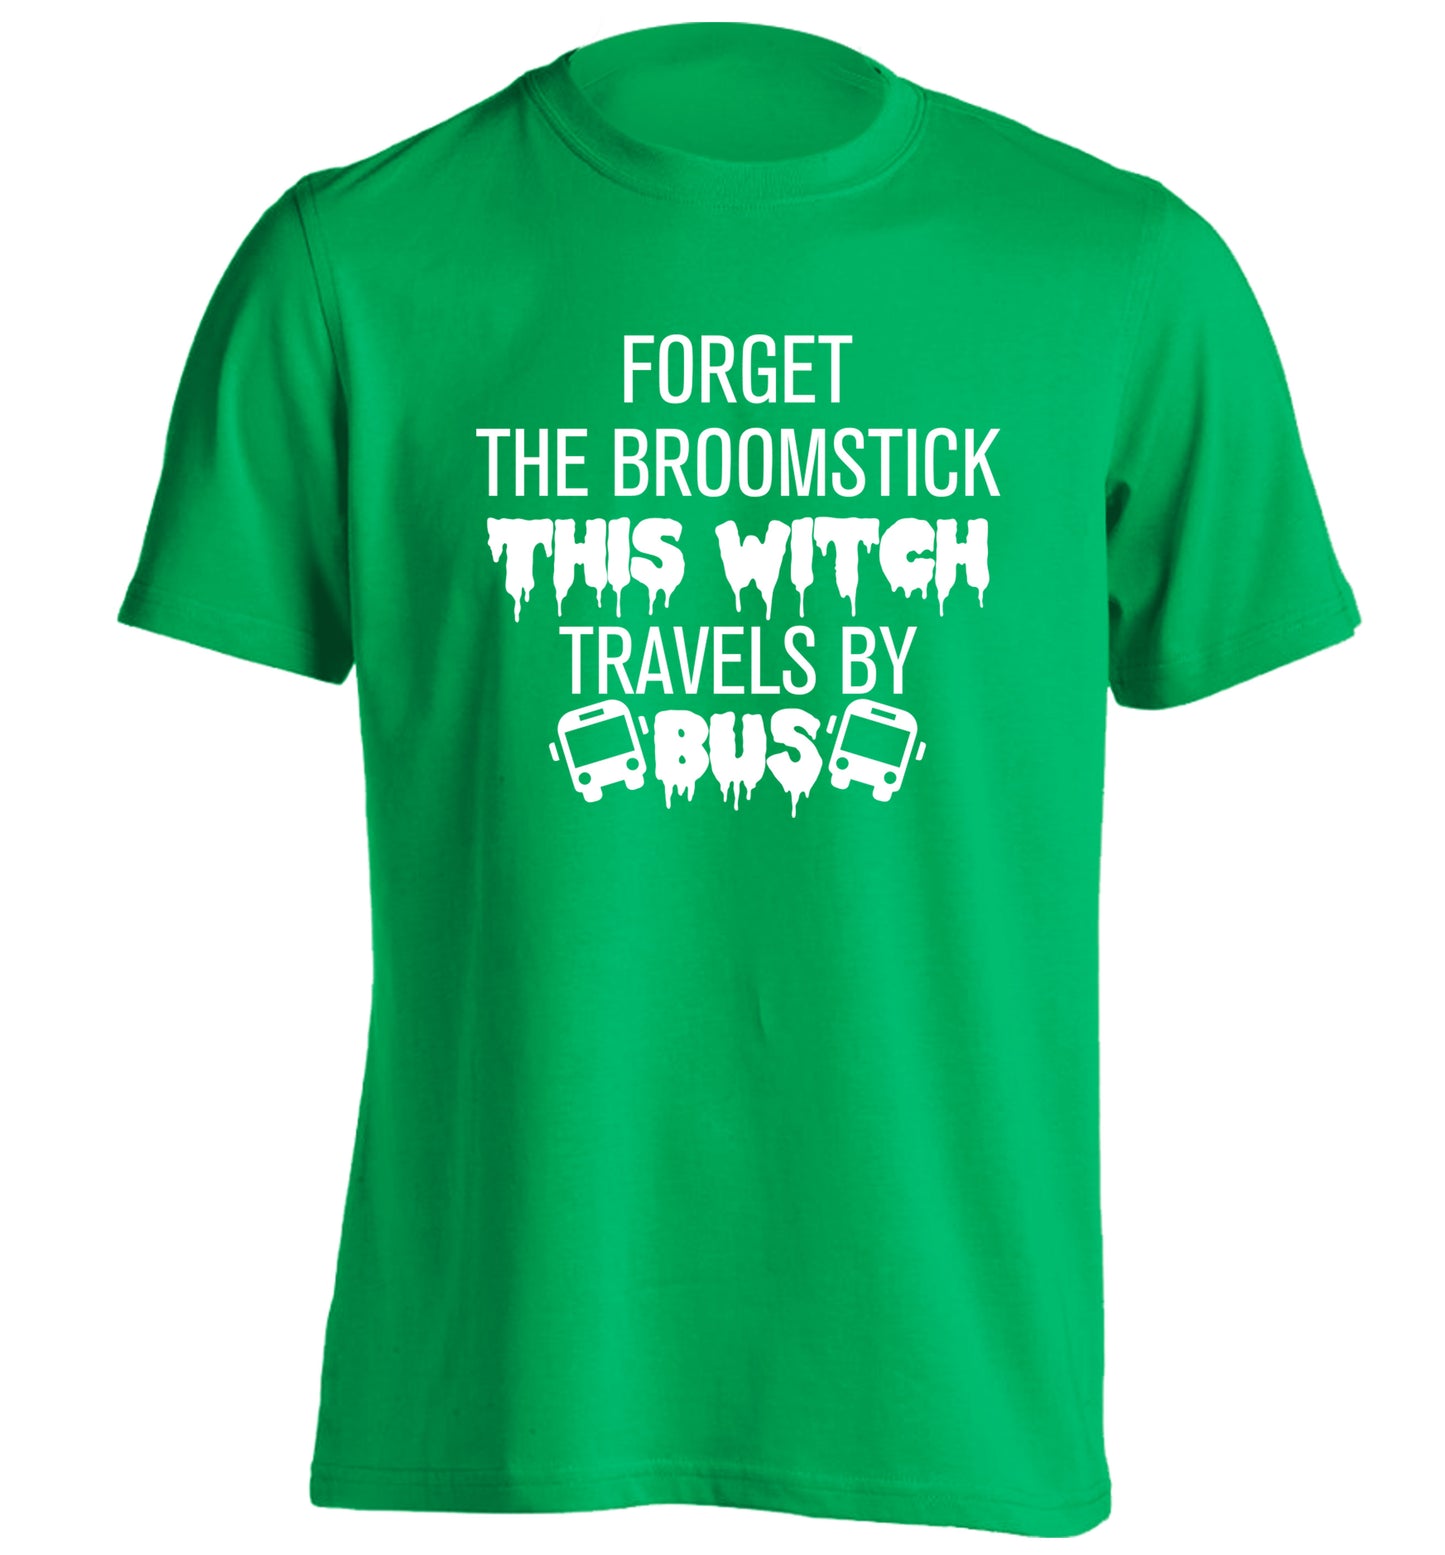 Forget the broomstick this witch travels by bus adults unisexgreen Tshirt 2XL